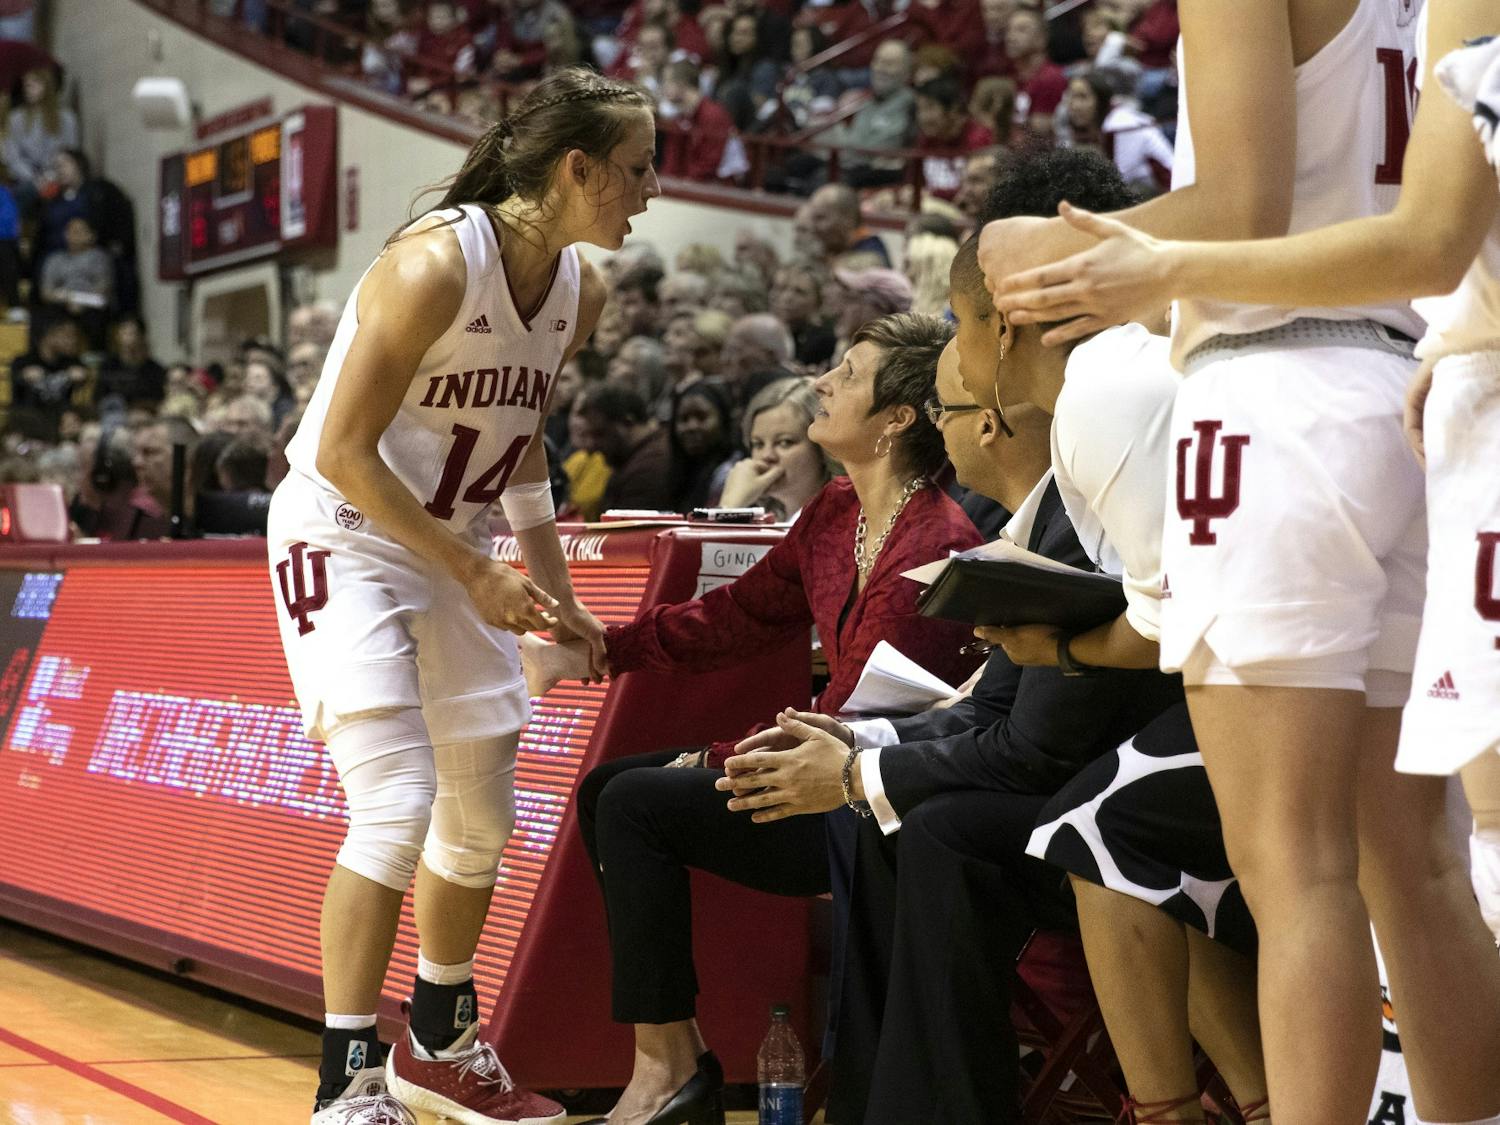 GALLERY: No. 12 IU women's basketball beats in-state rival Purdue 66-48